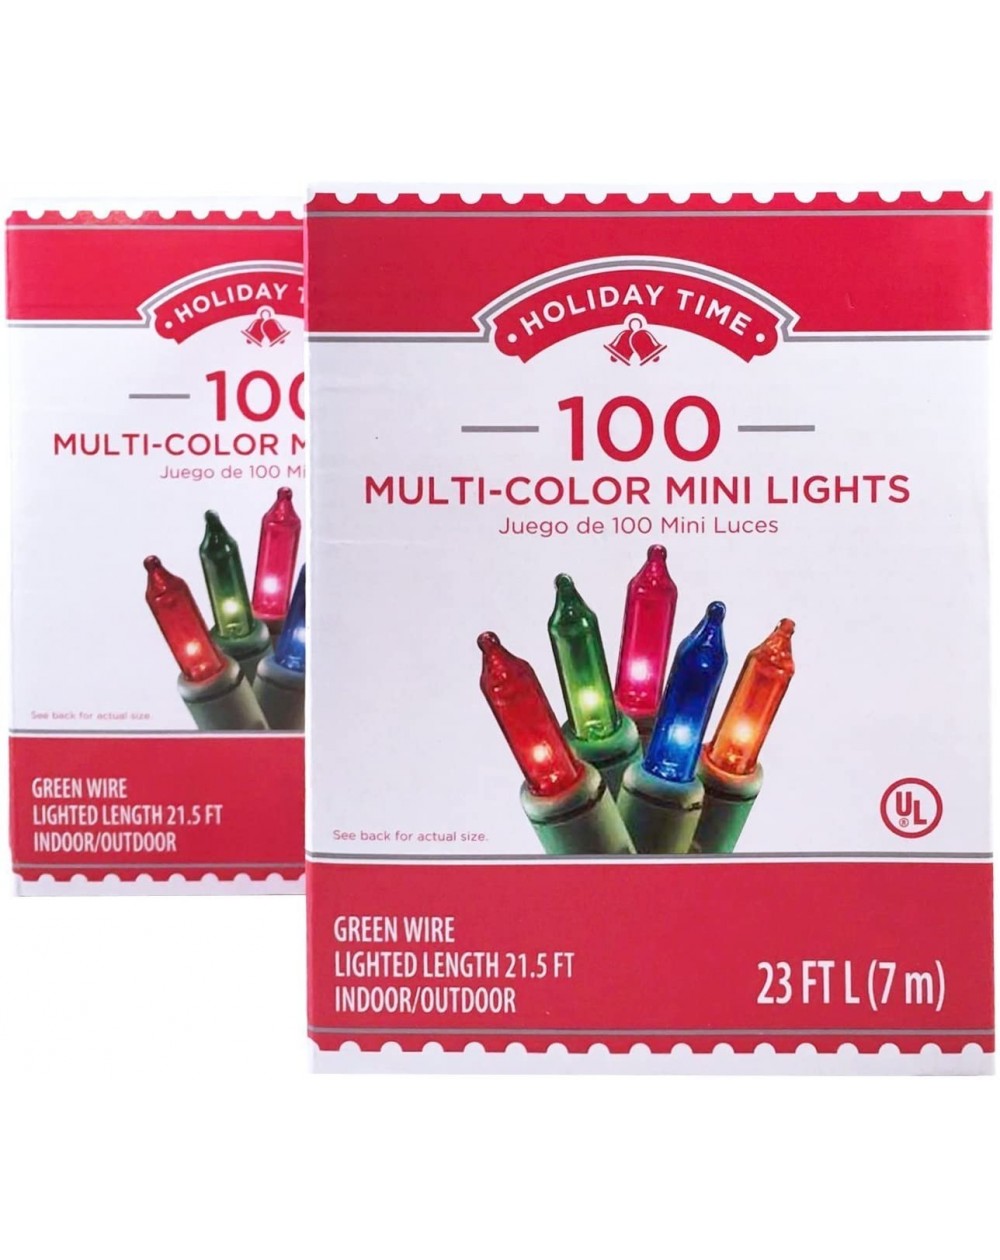 Outdoor String Lights 100 multicolor lights indoor/outdoor spare bulbs and fuses included - CP187I9OZ00 $16.52